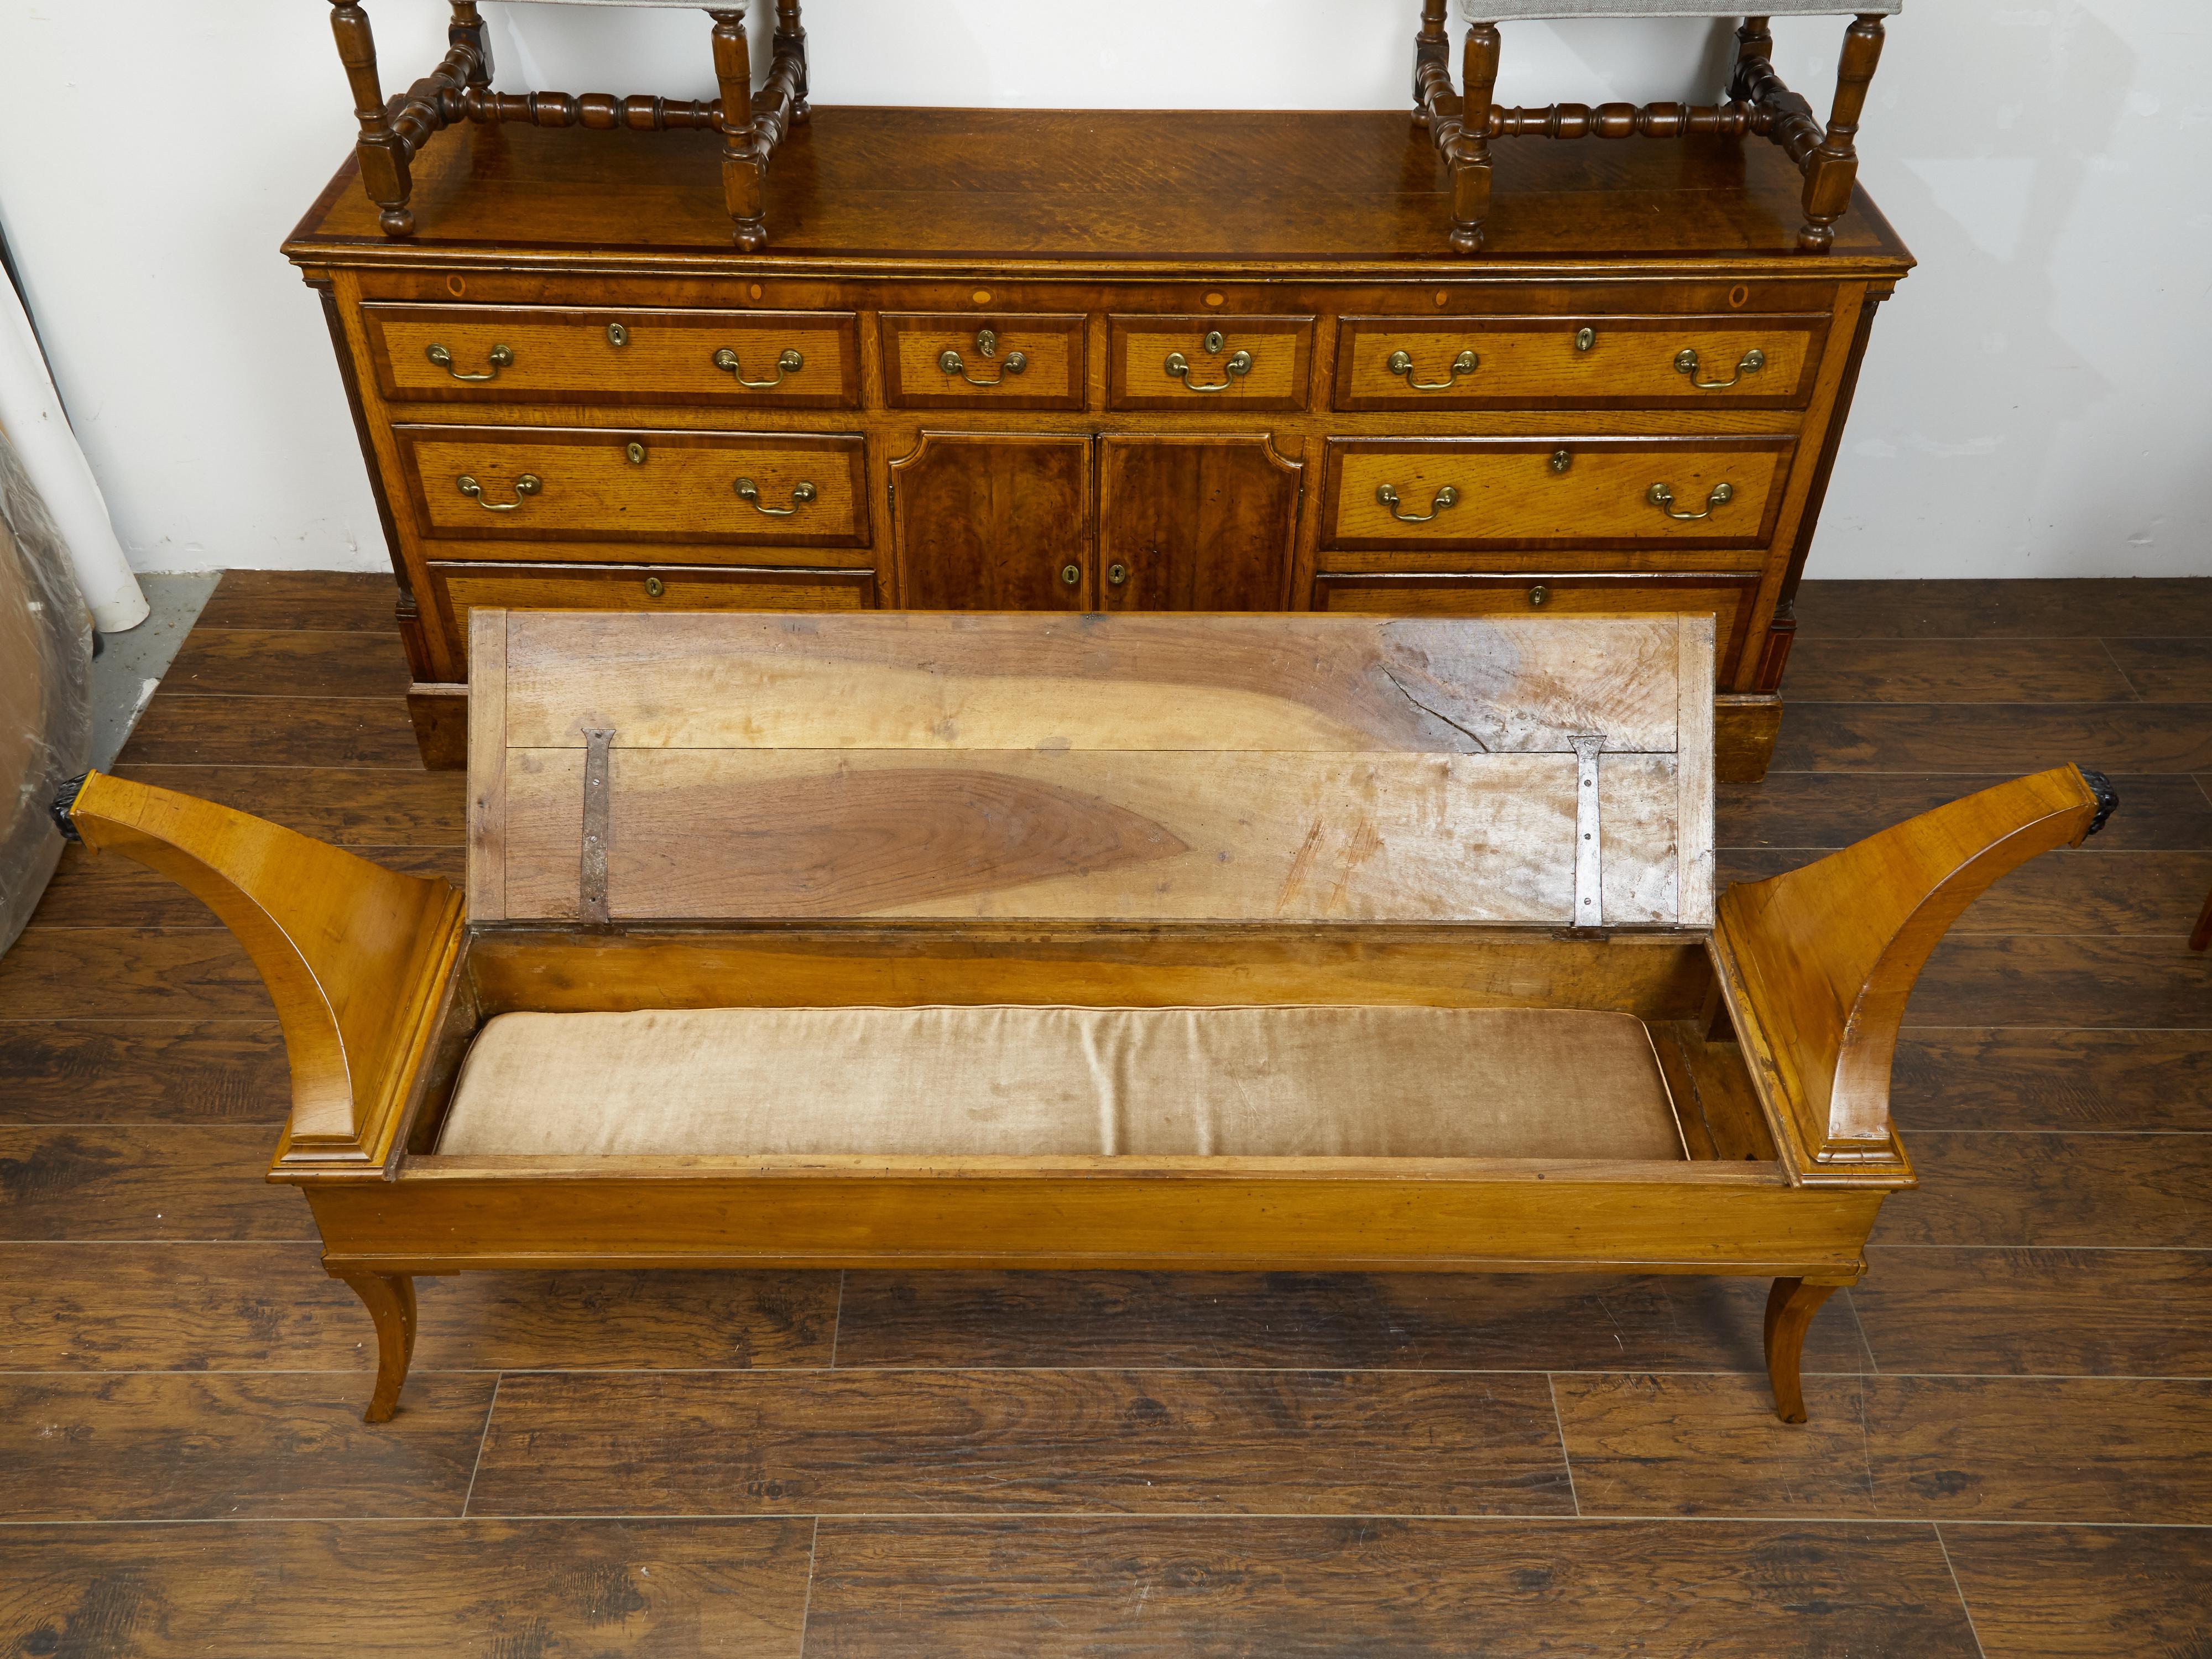 A French Restauration period walnut bench from the early 19th century, with lift-top seat, unusual out-scrolling arms and ebonized accents. Created in France during the first quarter of the 19th century, this Restauration bench captures our